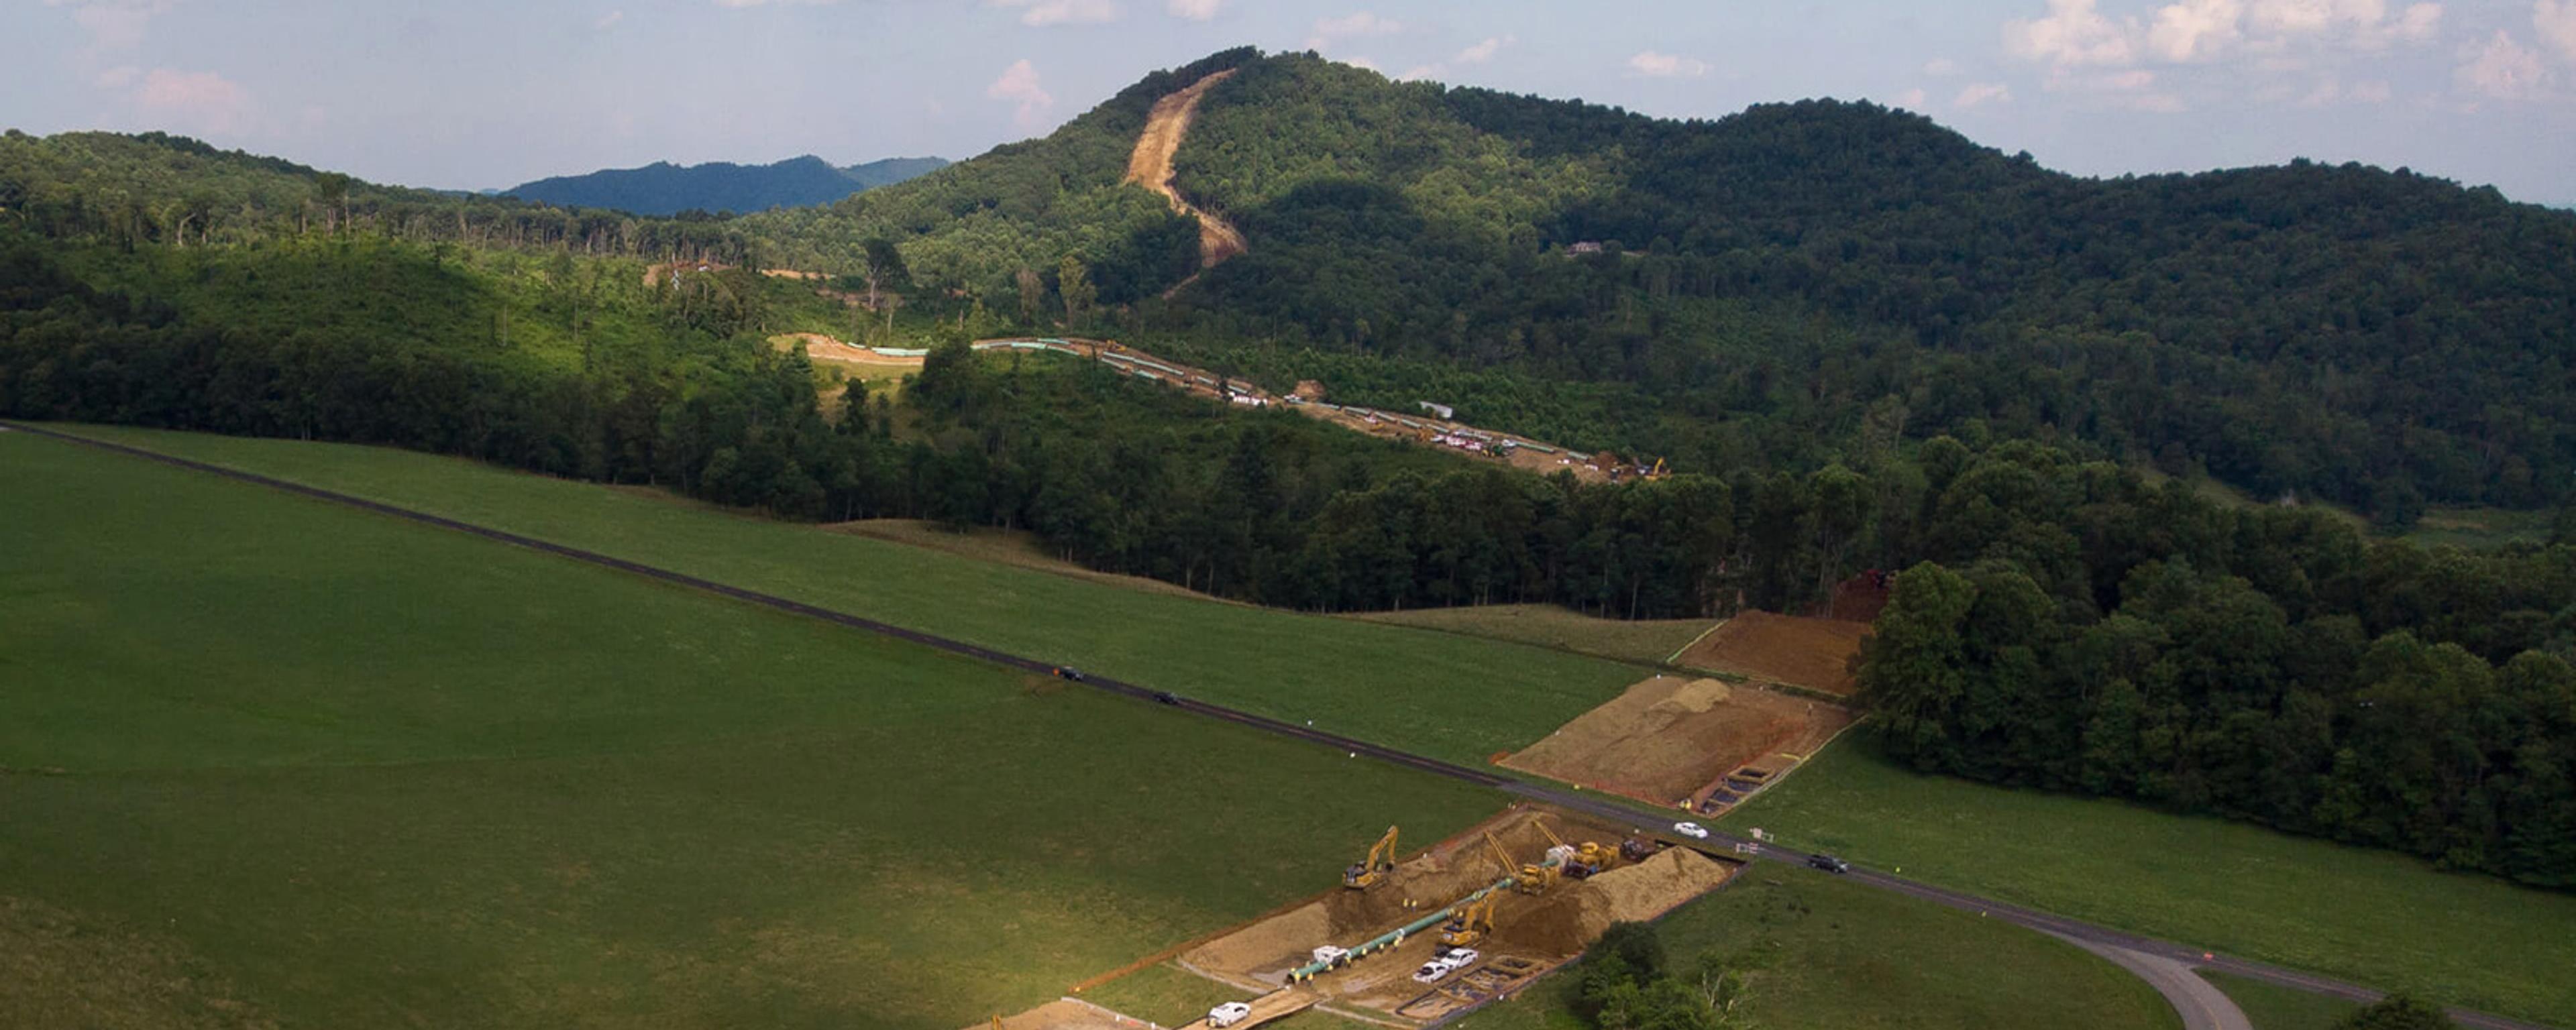 Aerial view of a large pipeline construction site with machinery and vehicles cutting through green fields and hills under a partly cloudy sky.